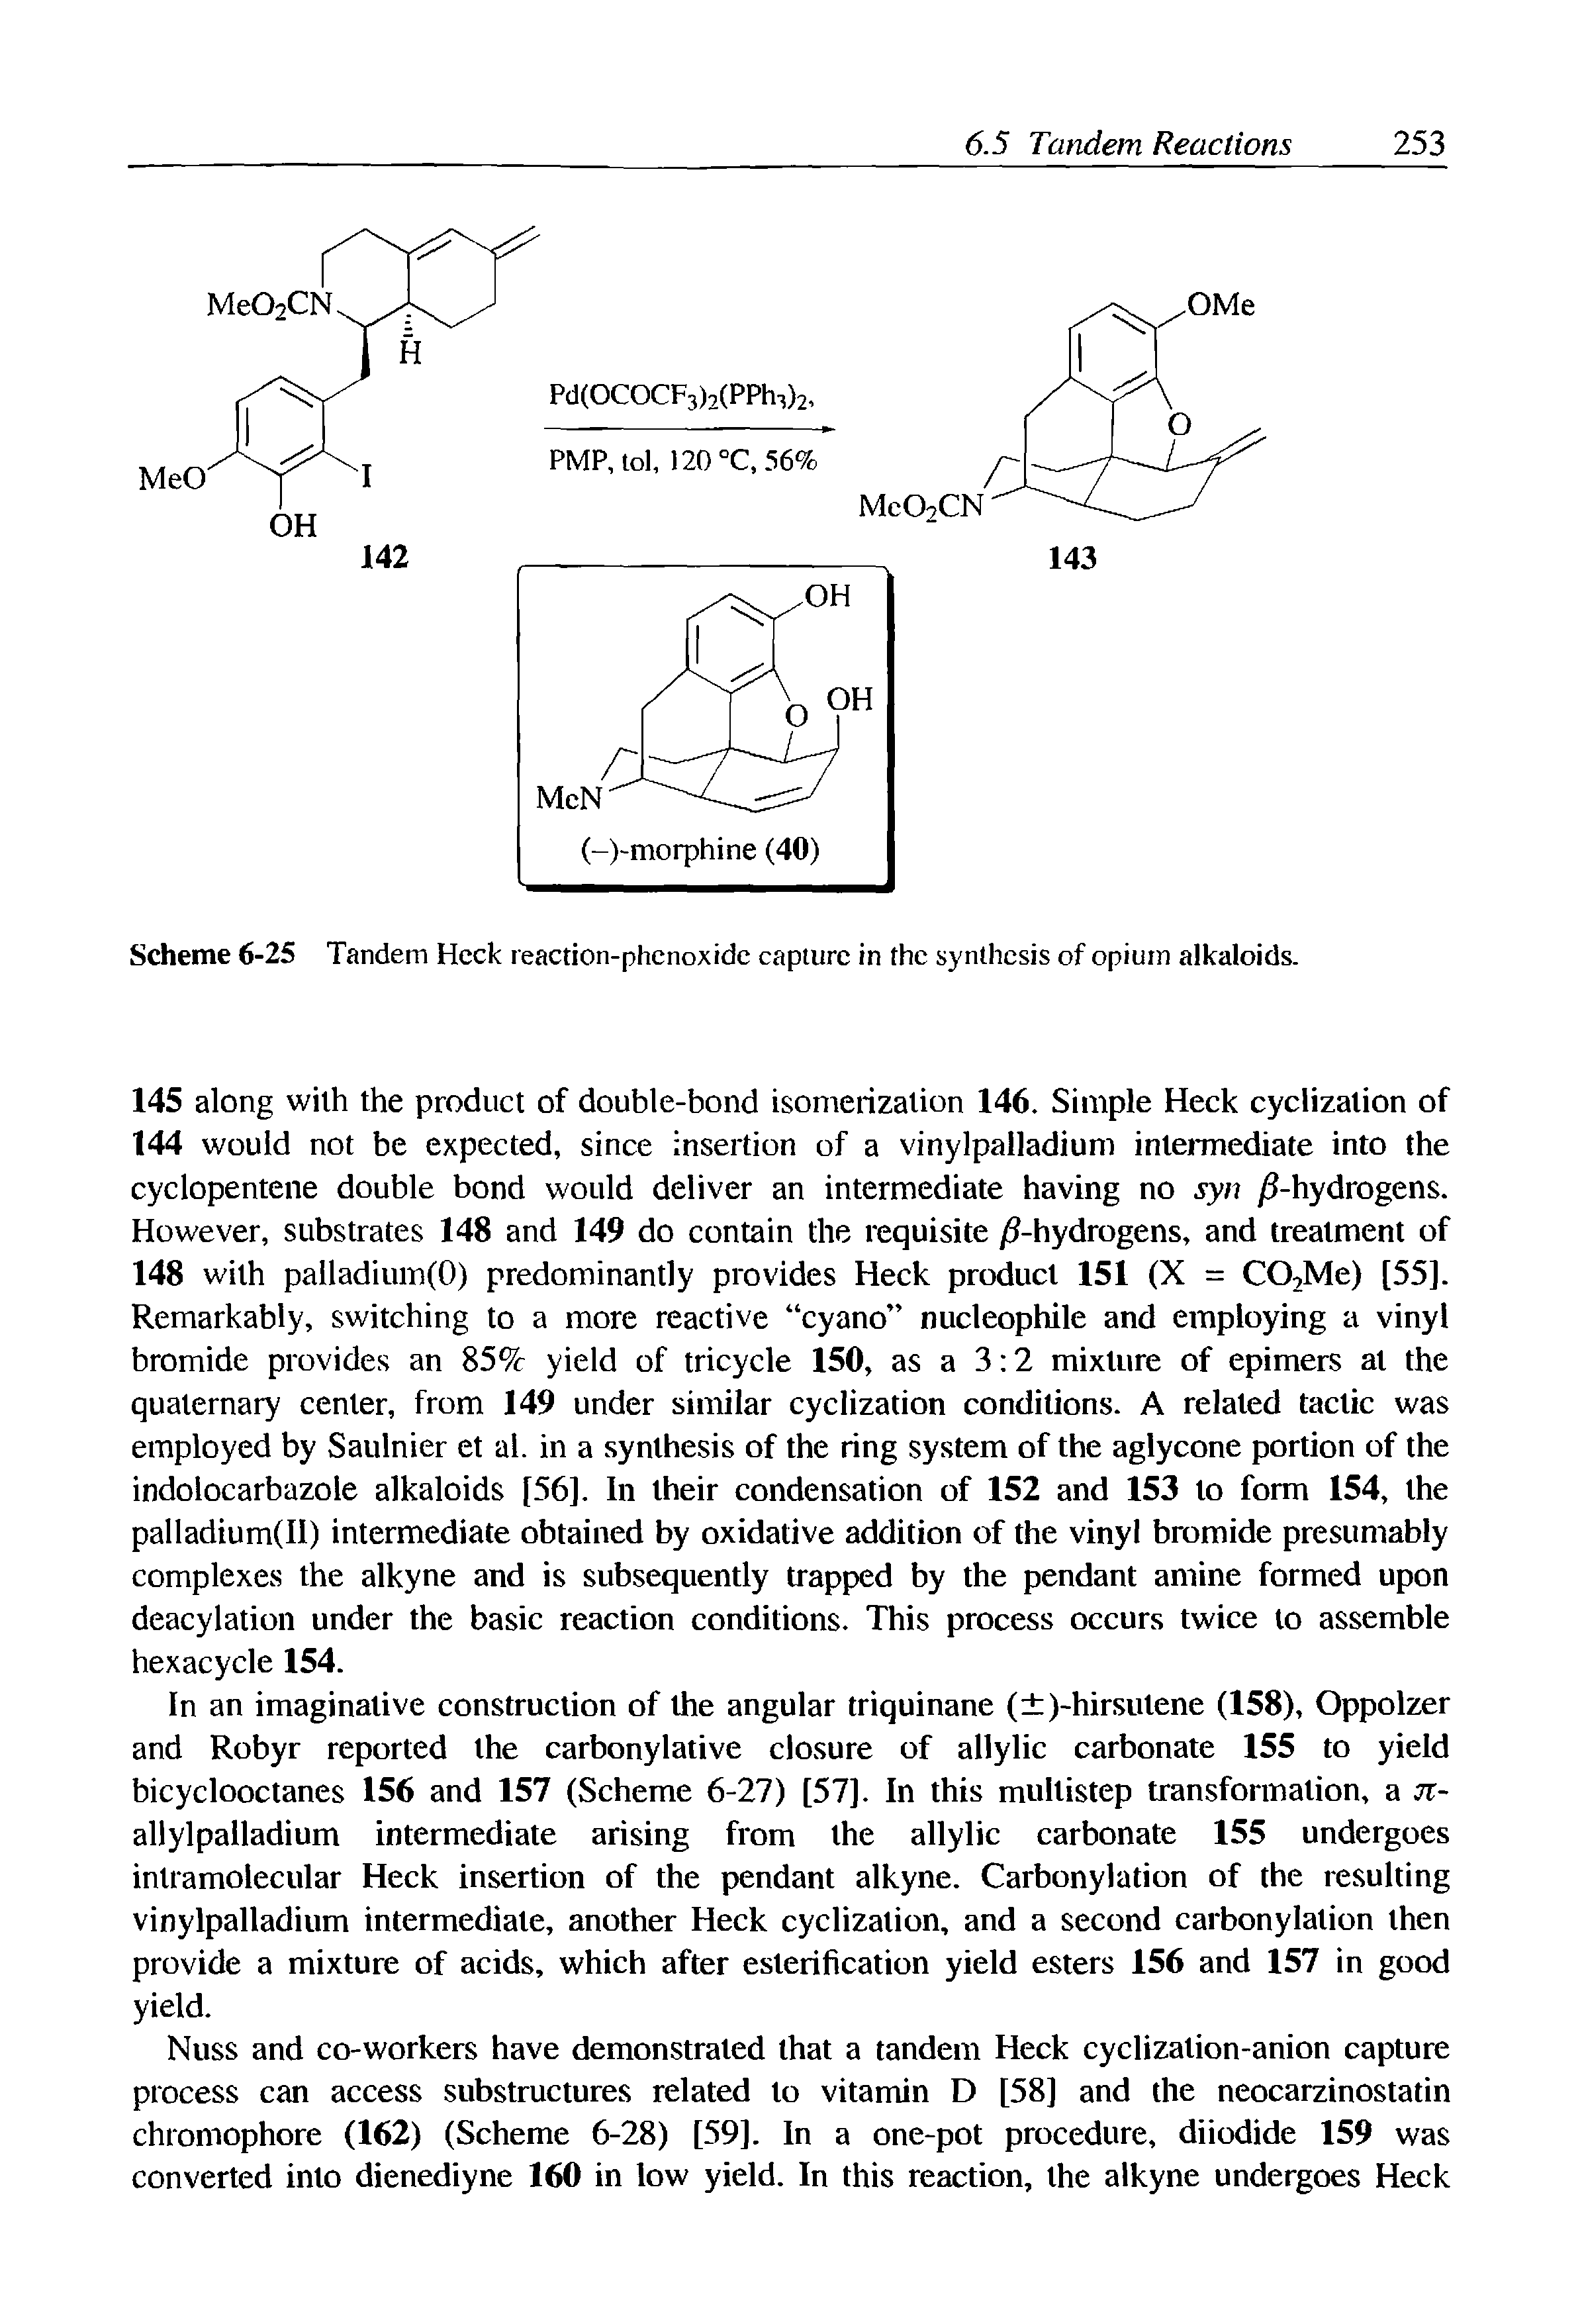 Scheme 6-25 Tandem Heck reaction-phcnoxidc capture in the synthesis of opium alkaloids.